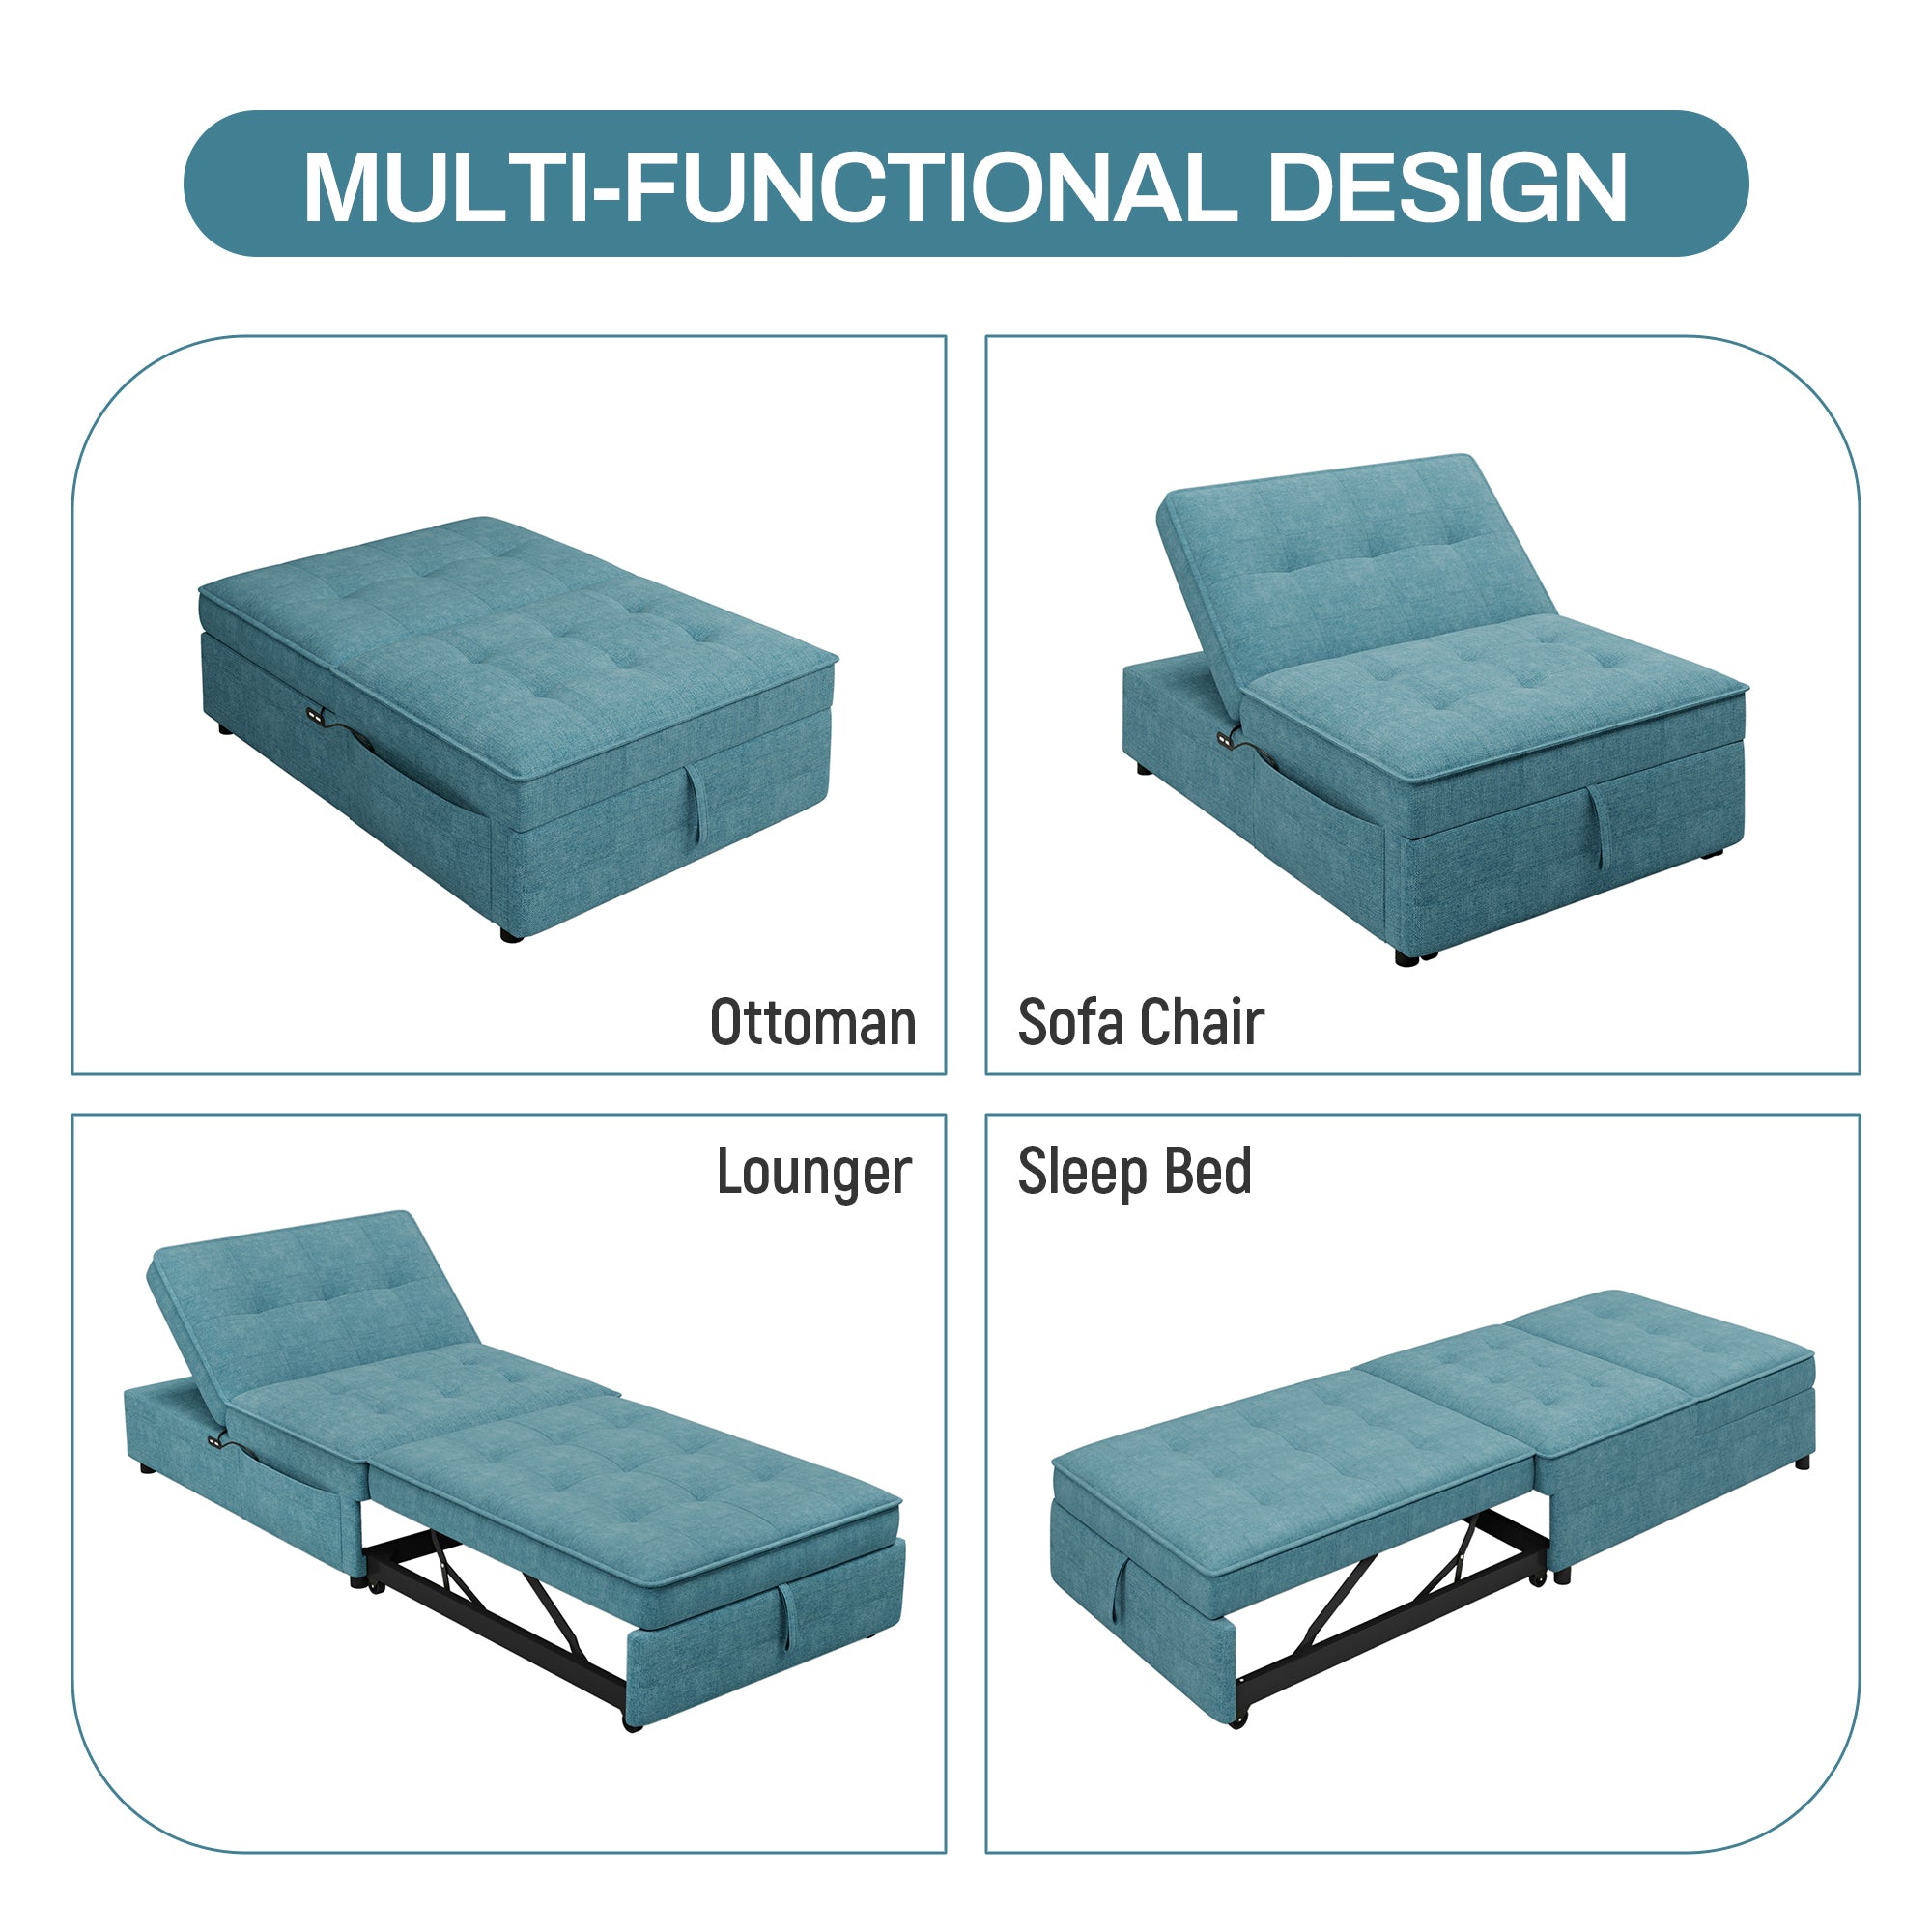 4 in 1 Sofa Bed, Chair Bed, Multi Function Folding teal-primary living space-linen